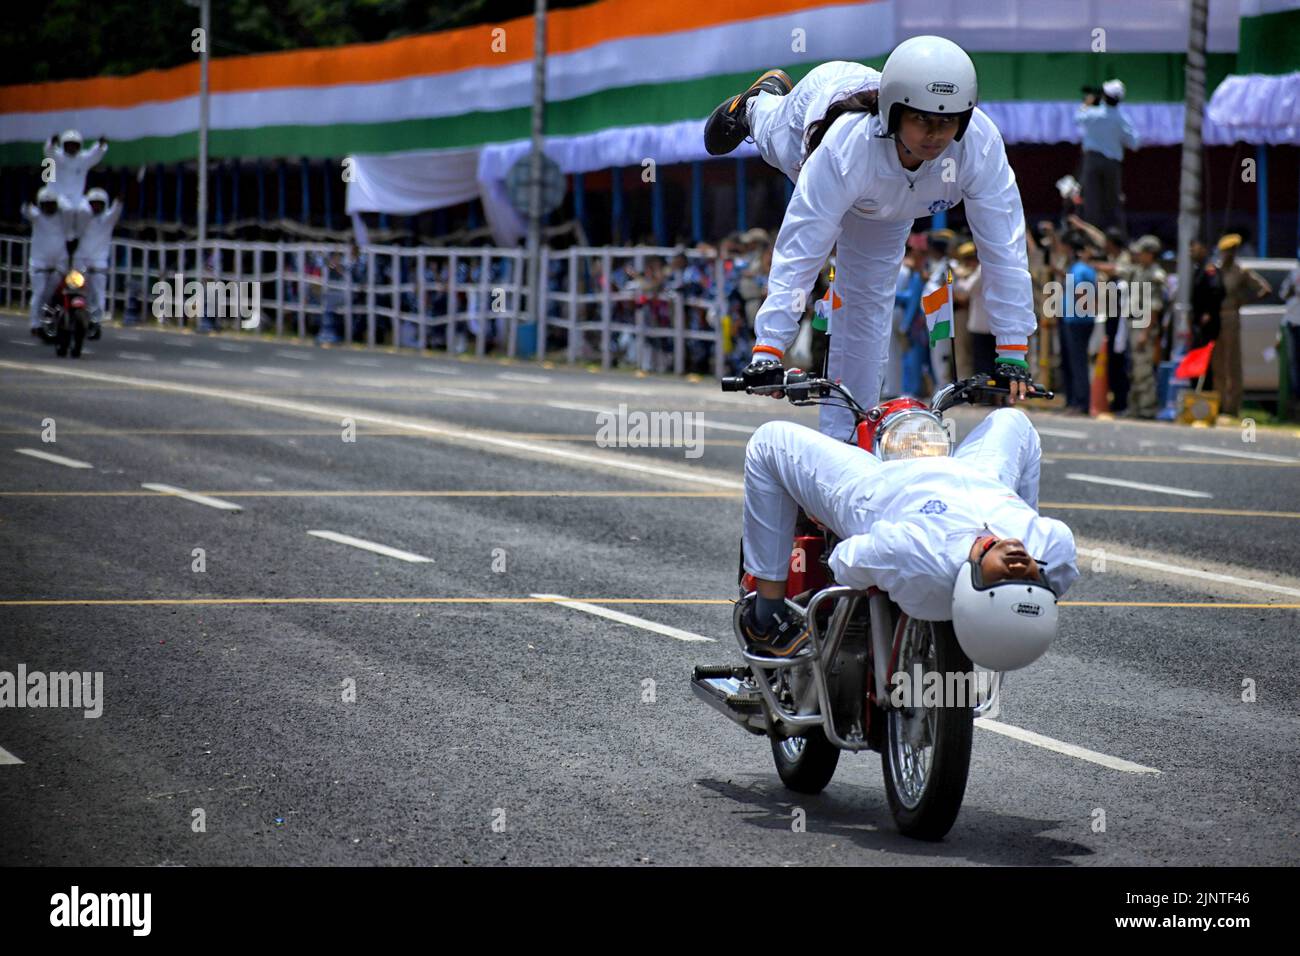 Kolkata Police woman officers seen practicing different stunts on bikes during the Independence day Final Dress Rehearsal. India prepares to celebrate the 75th Independence day on 15th August 2022 as part of the Azadi Ka Amrit Mahotsav celebration. Stock Photo